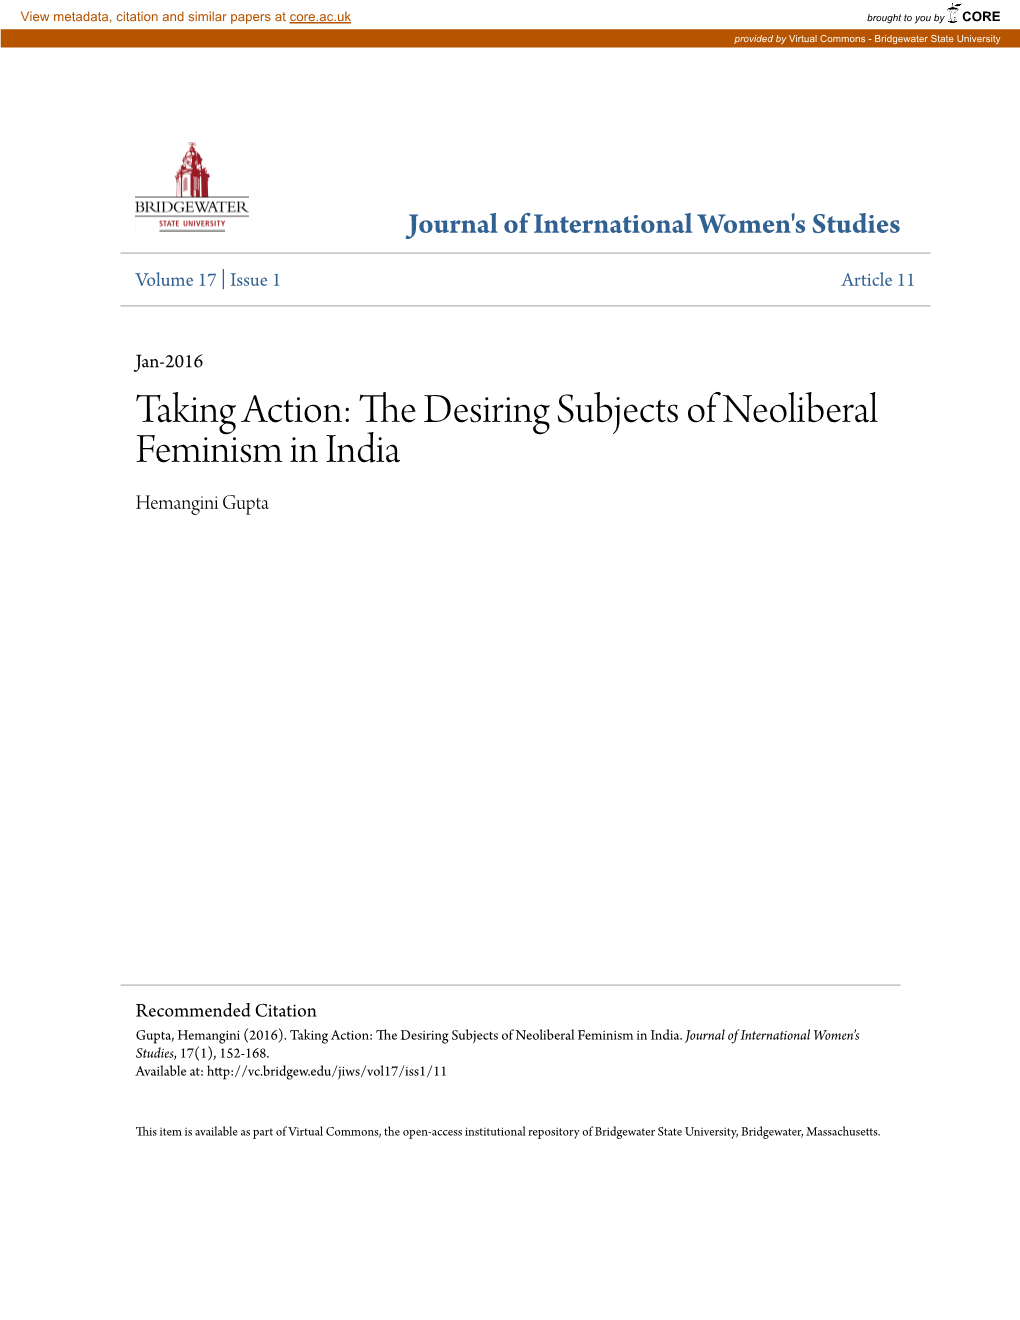 Taking Action: the Desiring Subjects of Neoliberal Feminism in India